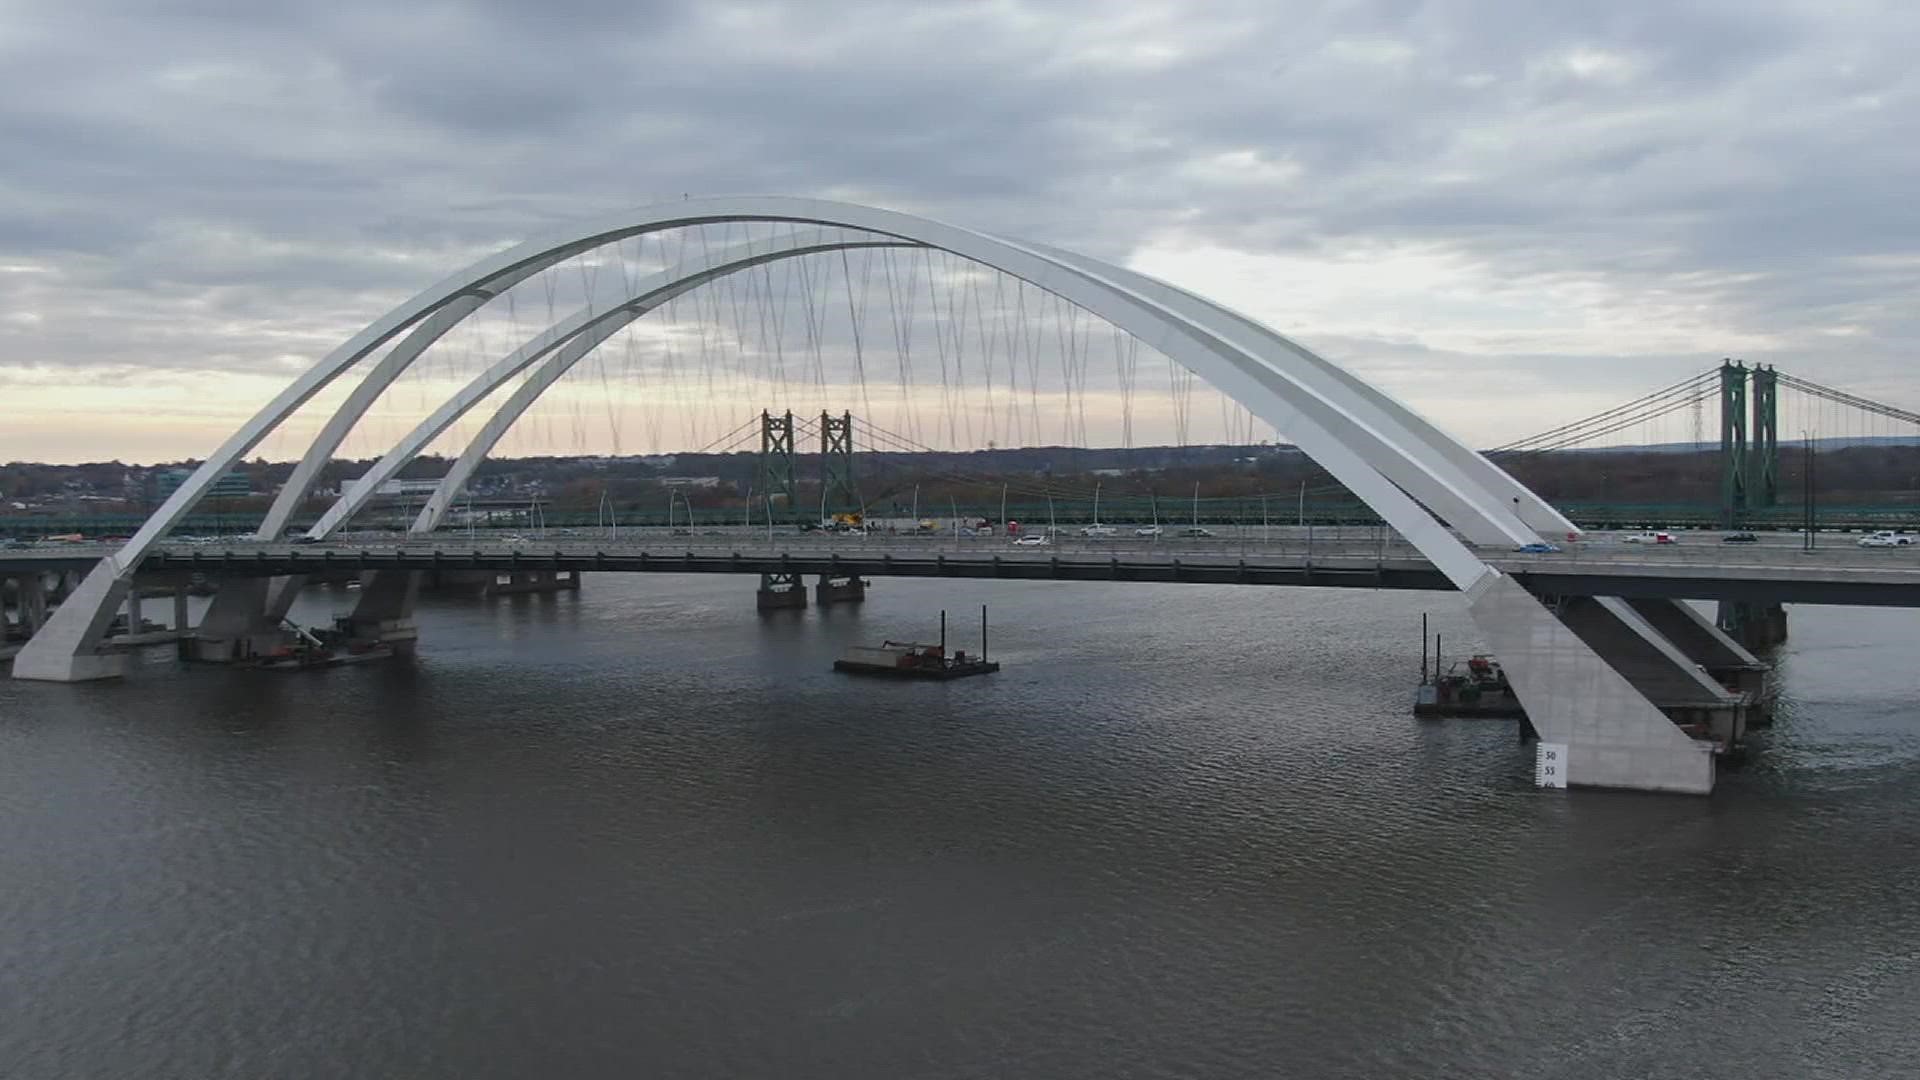 Project leaders say the public will have a chance to walk on the Illinois-bound bridge span on Dec. 1, a few days before the span opens to traffic.